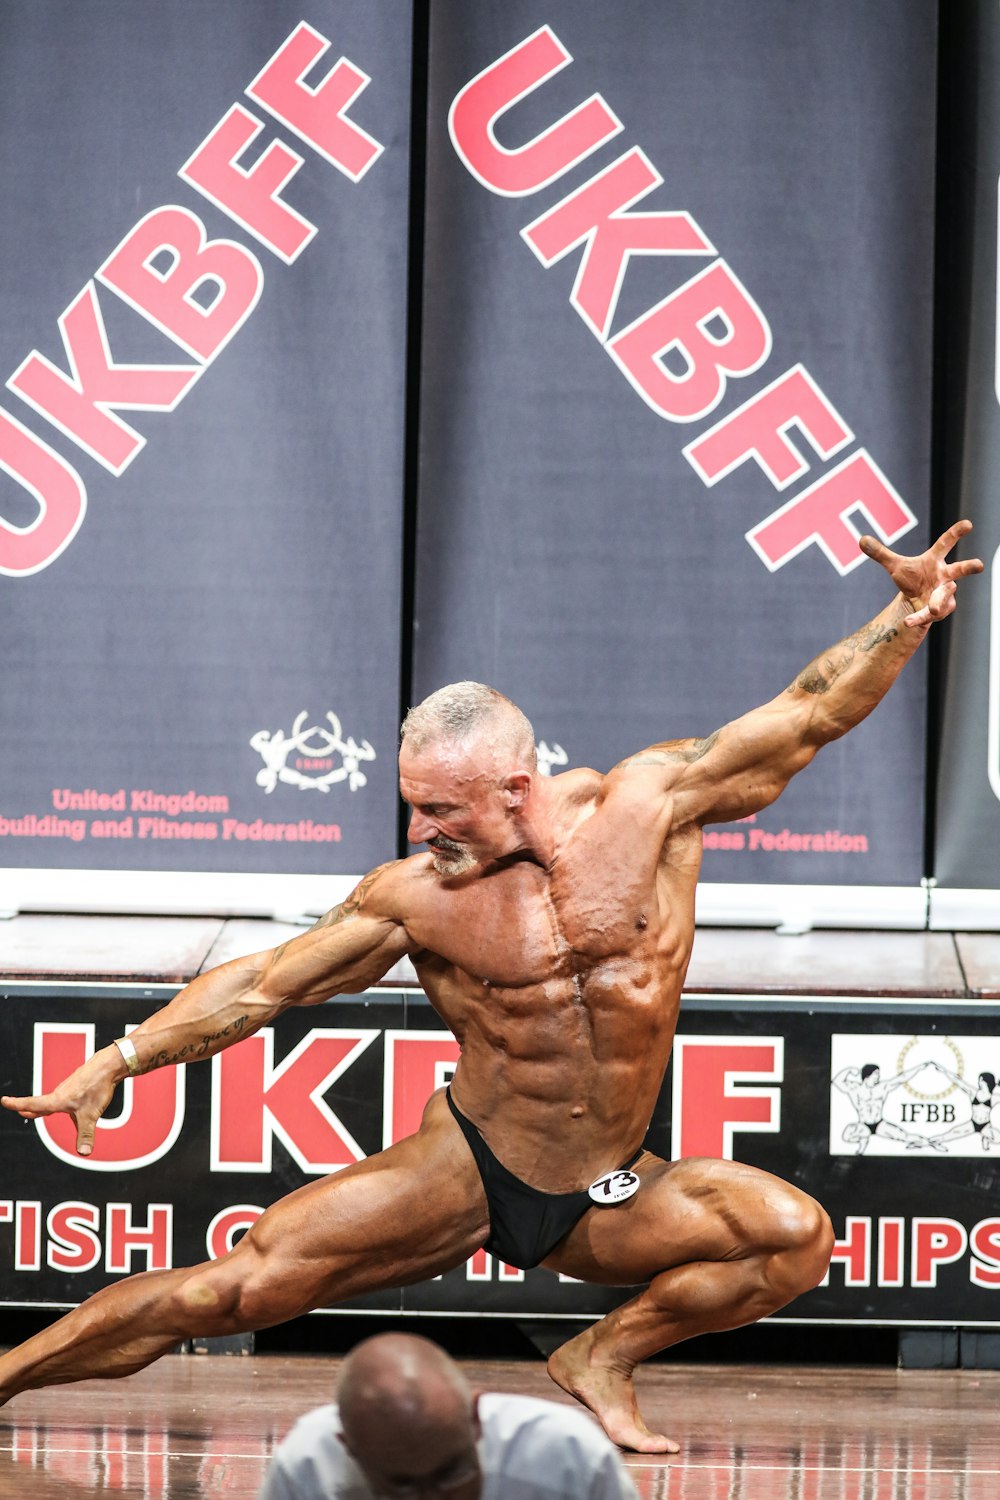 a bodybuilding man doing a trick on a wooden floor